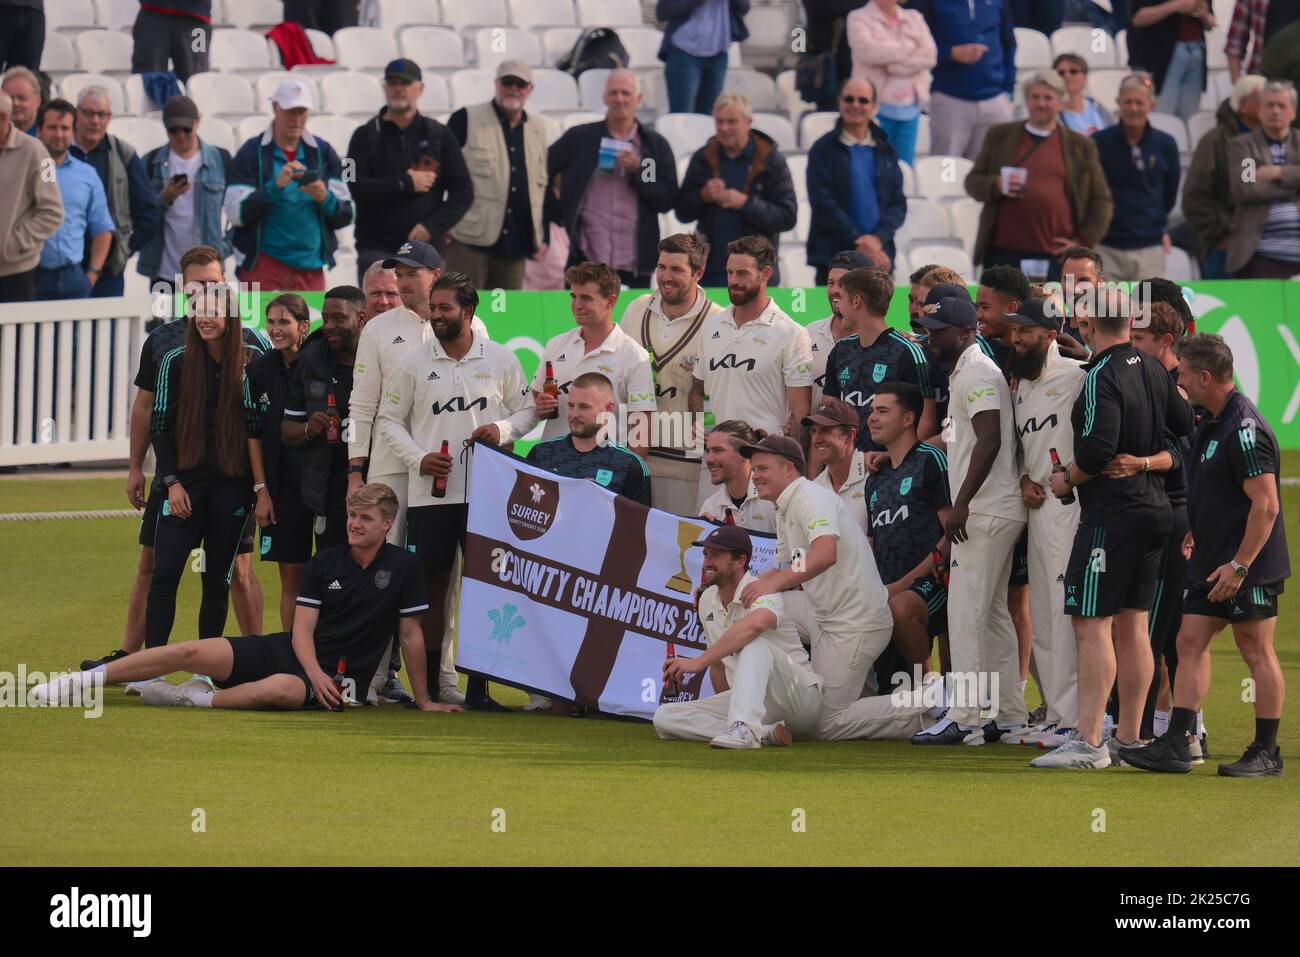 22 September, 2022. London, UK. The Surrey squad celebrates winning the County Championship title after beating Yorkshire at the Kia Oval, day three David Rowe/Alamy Live News Stock Photo